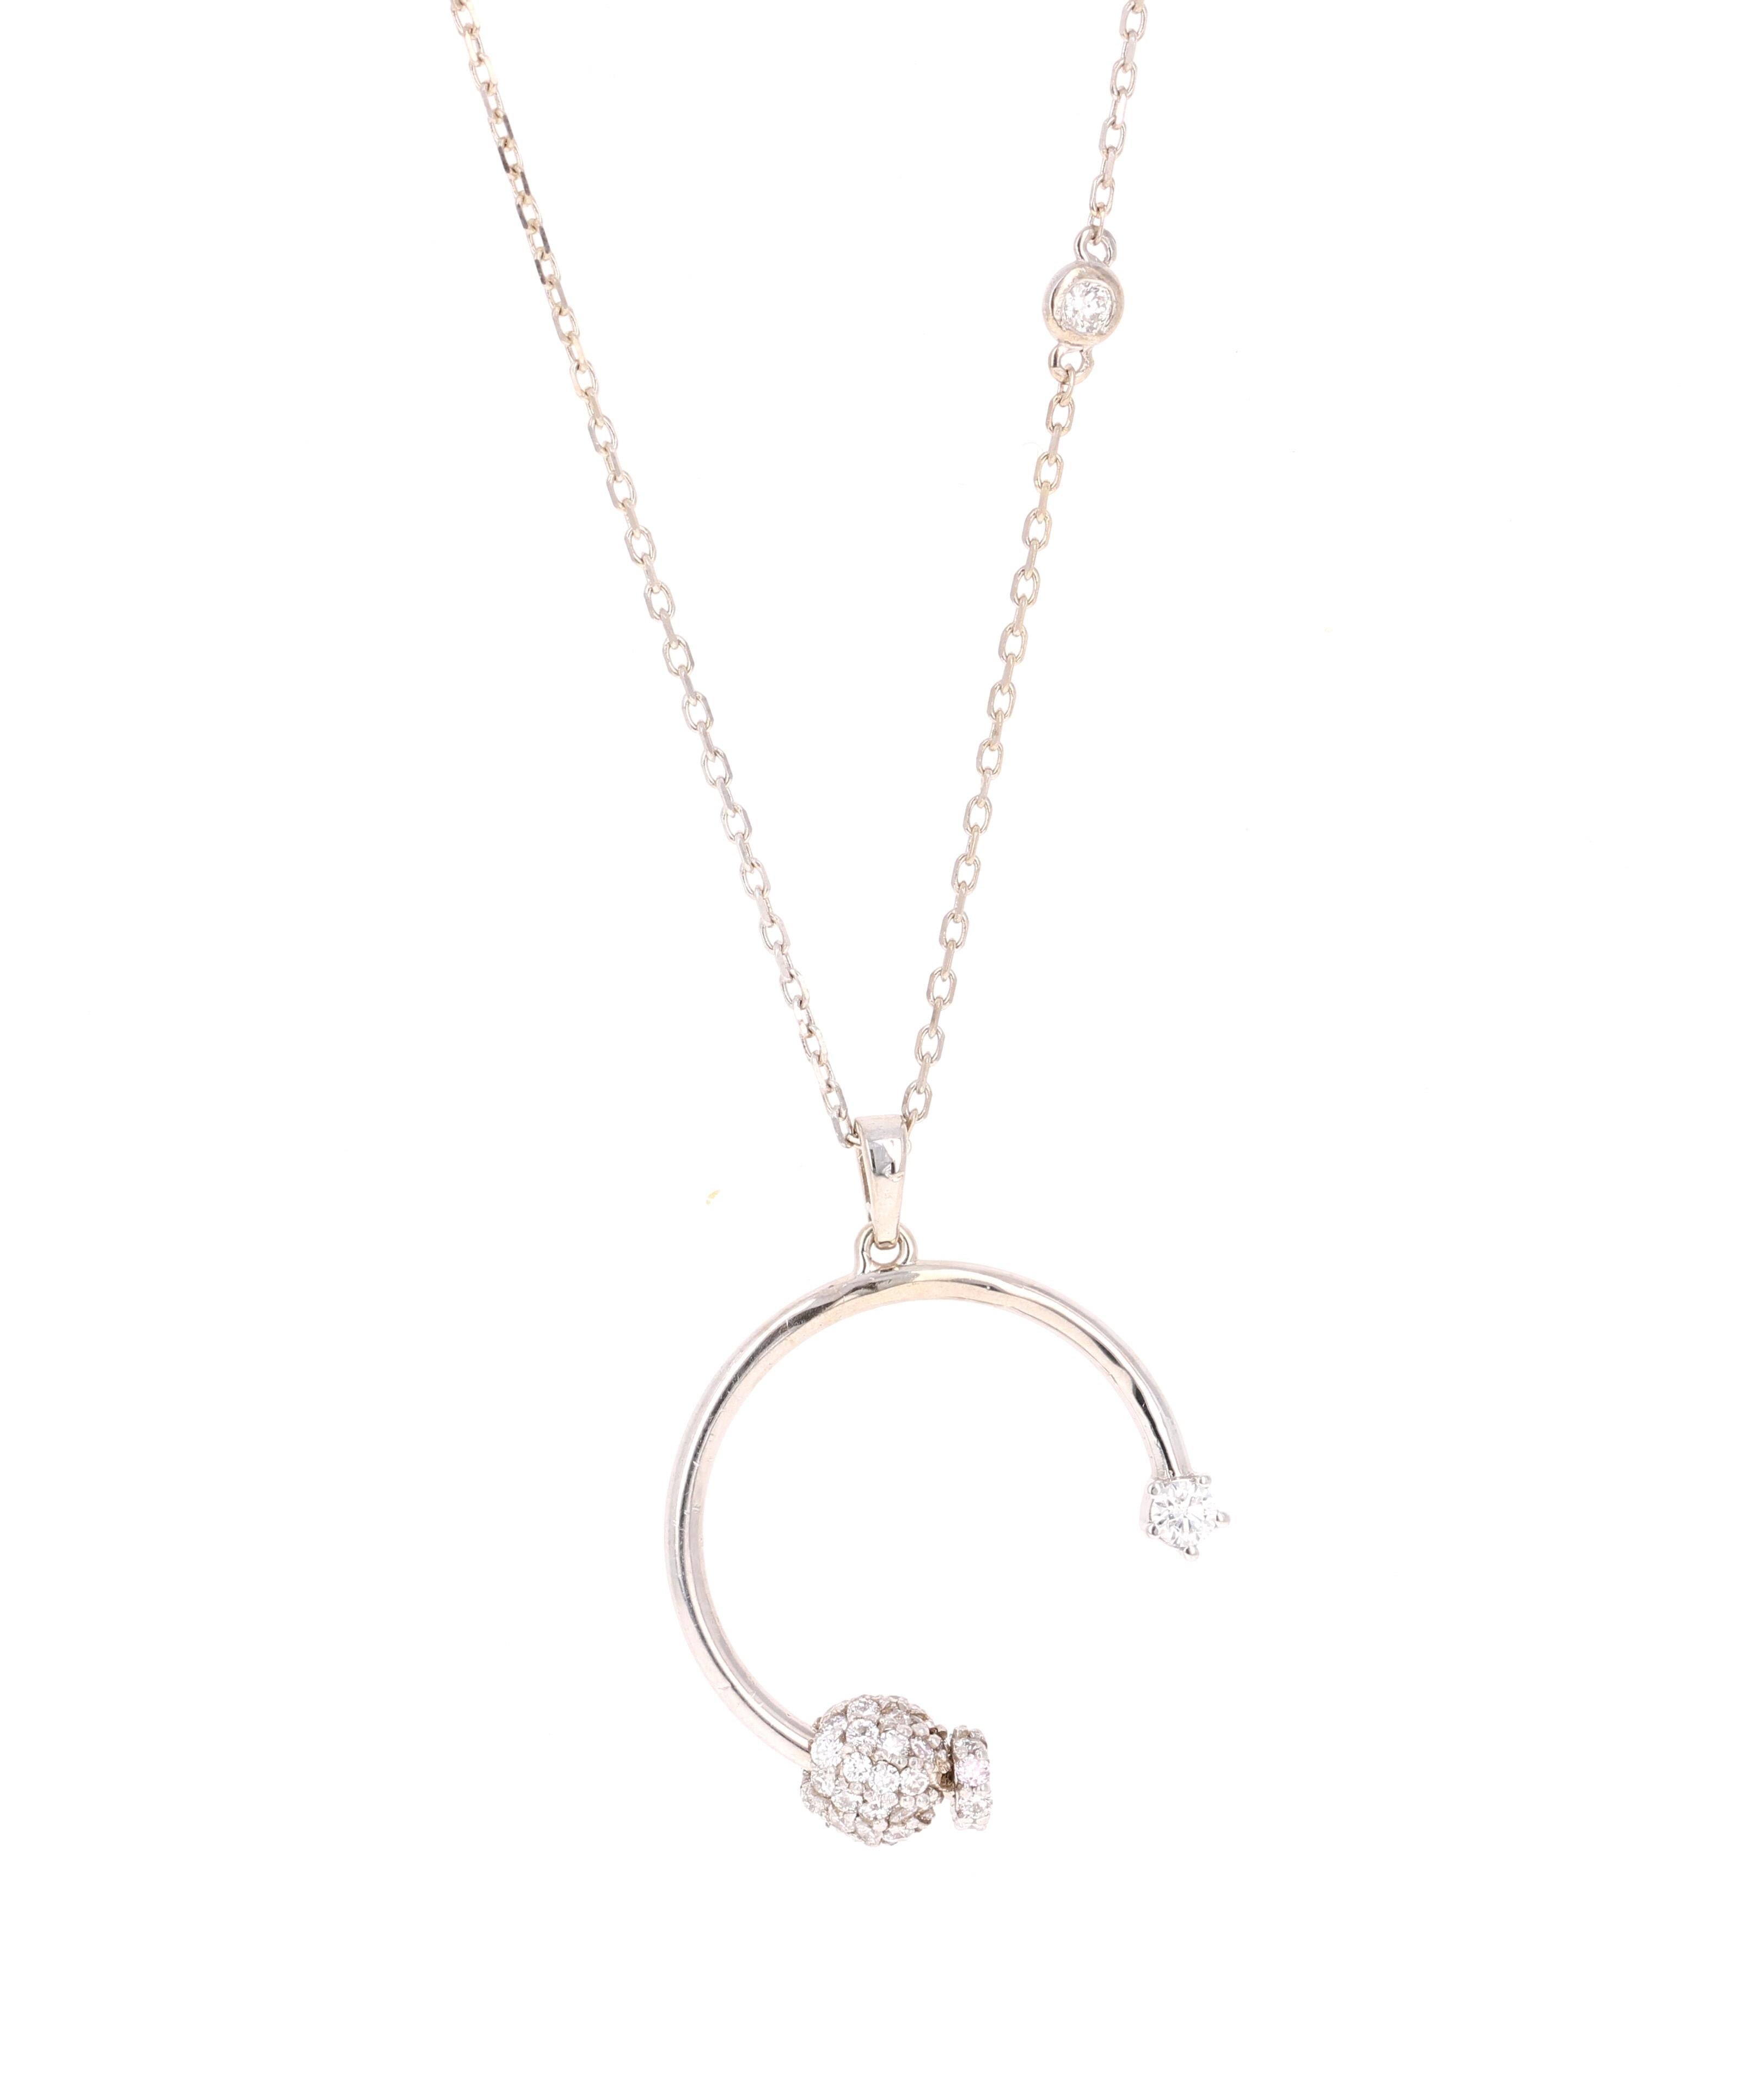 This beautiful Designer Inspired Circle pendant has 65 Round Cut Diamonds (Clarity: SI, Color: F) that weigh 0.58 Carats and comes with a beautiful Diamond by Yard style necklace. 

It is beautifully curated in 14 Karat White Gold and weighs 3.2